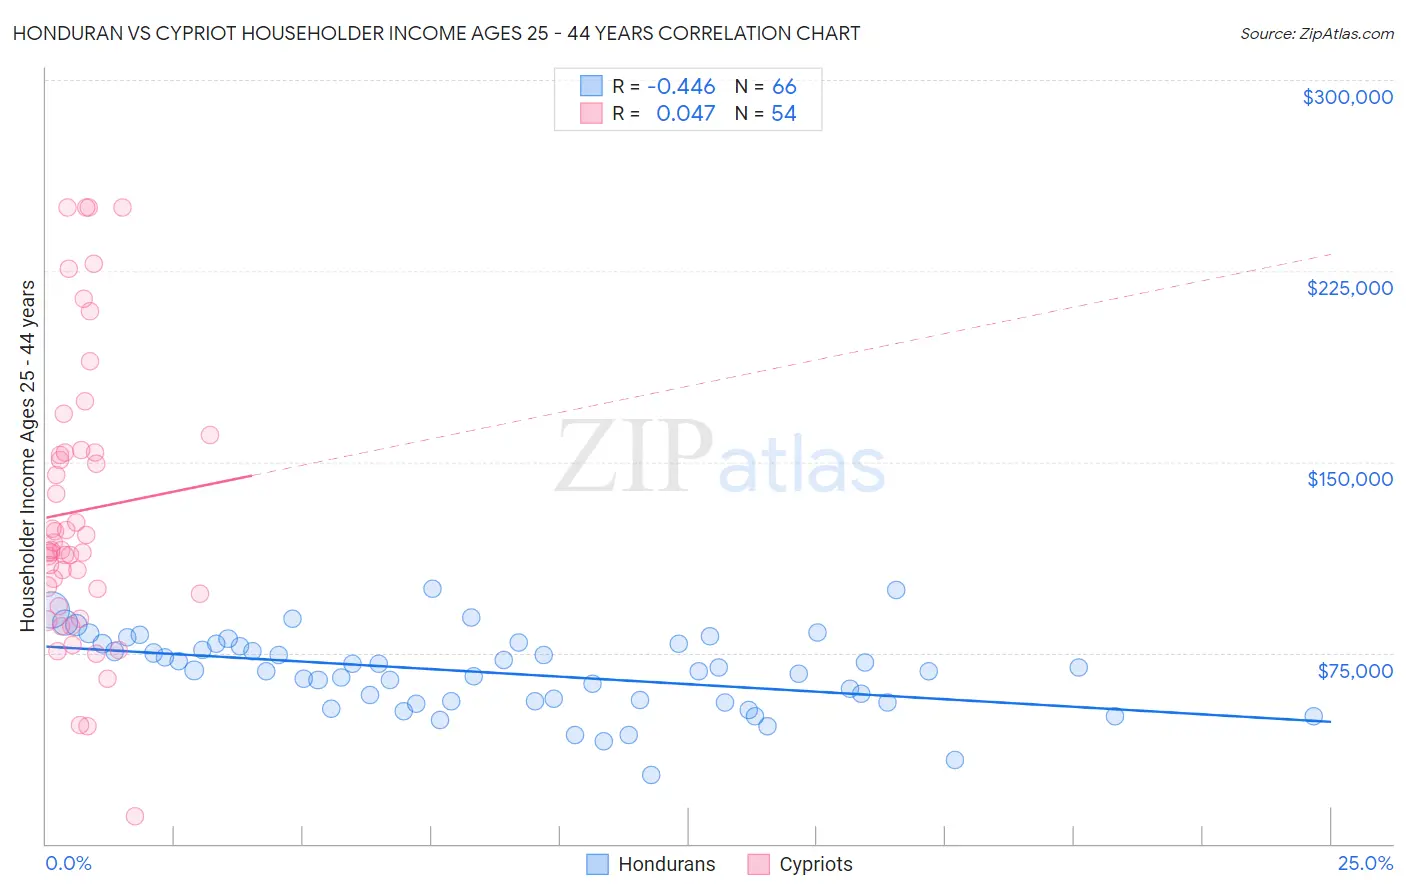 Honduran vs Cypriot Householder Income Ages 25 - 44 years